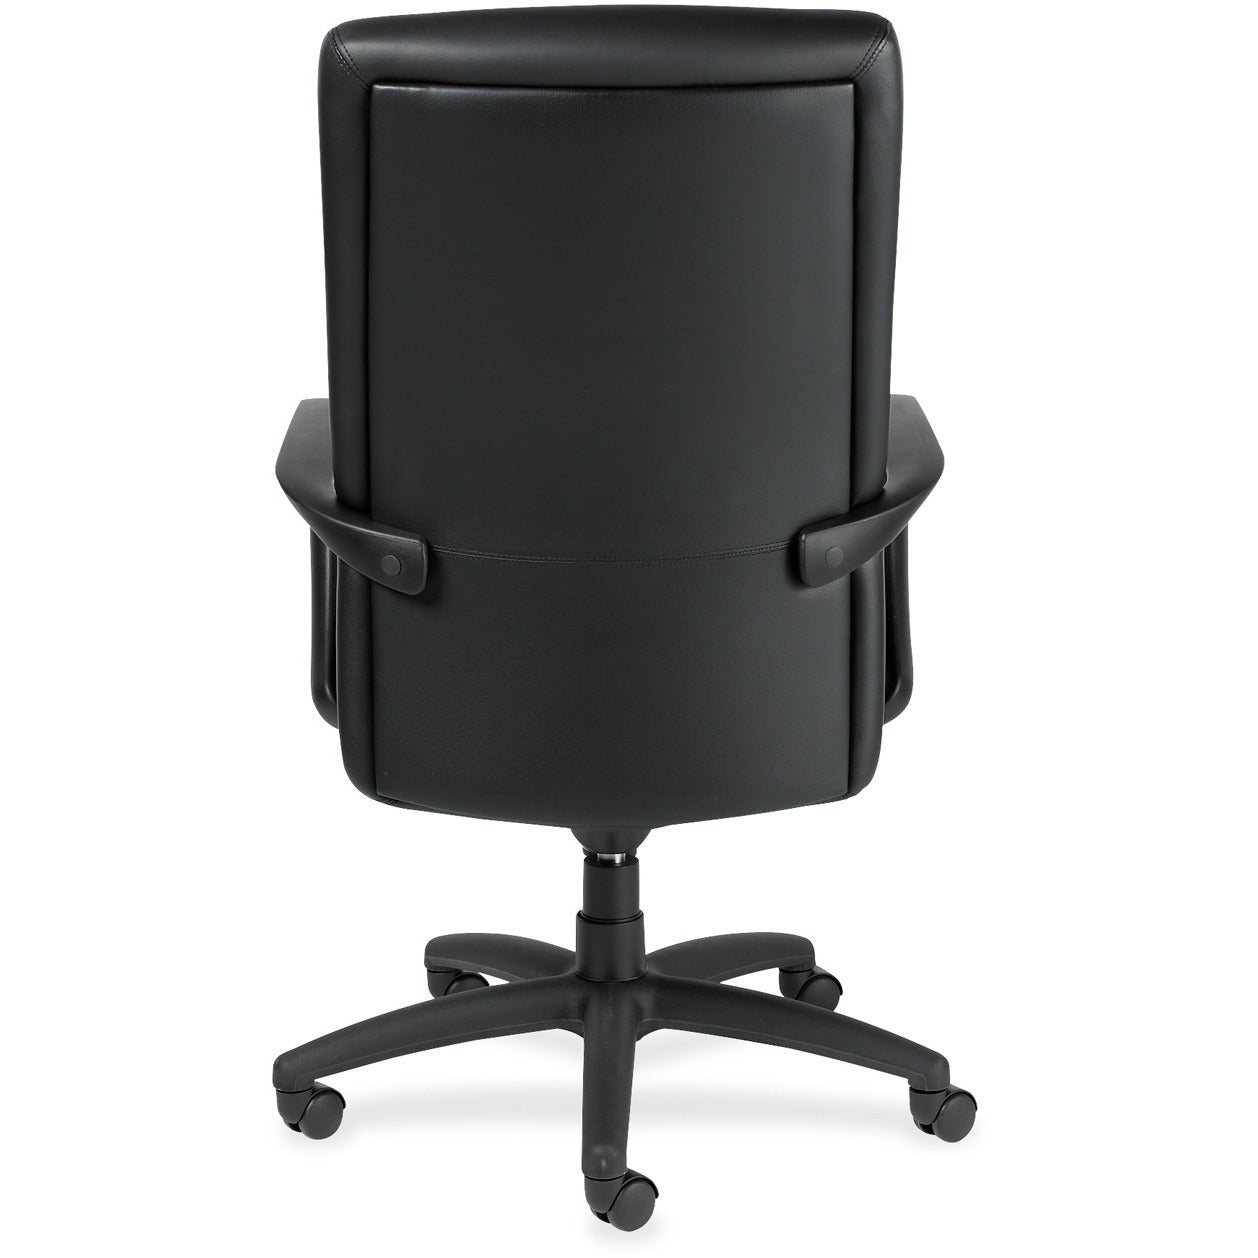 Eurotech Manchester High Back Executive Chair - Black Leather Seat - Black Leather Back - Steel Frame - 5-star Base - 1 Each - 4